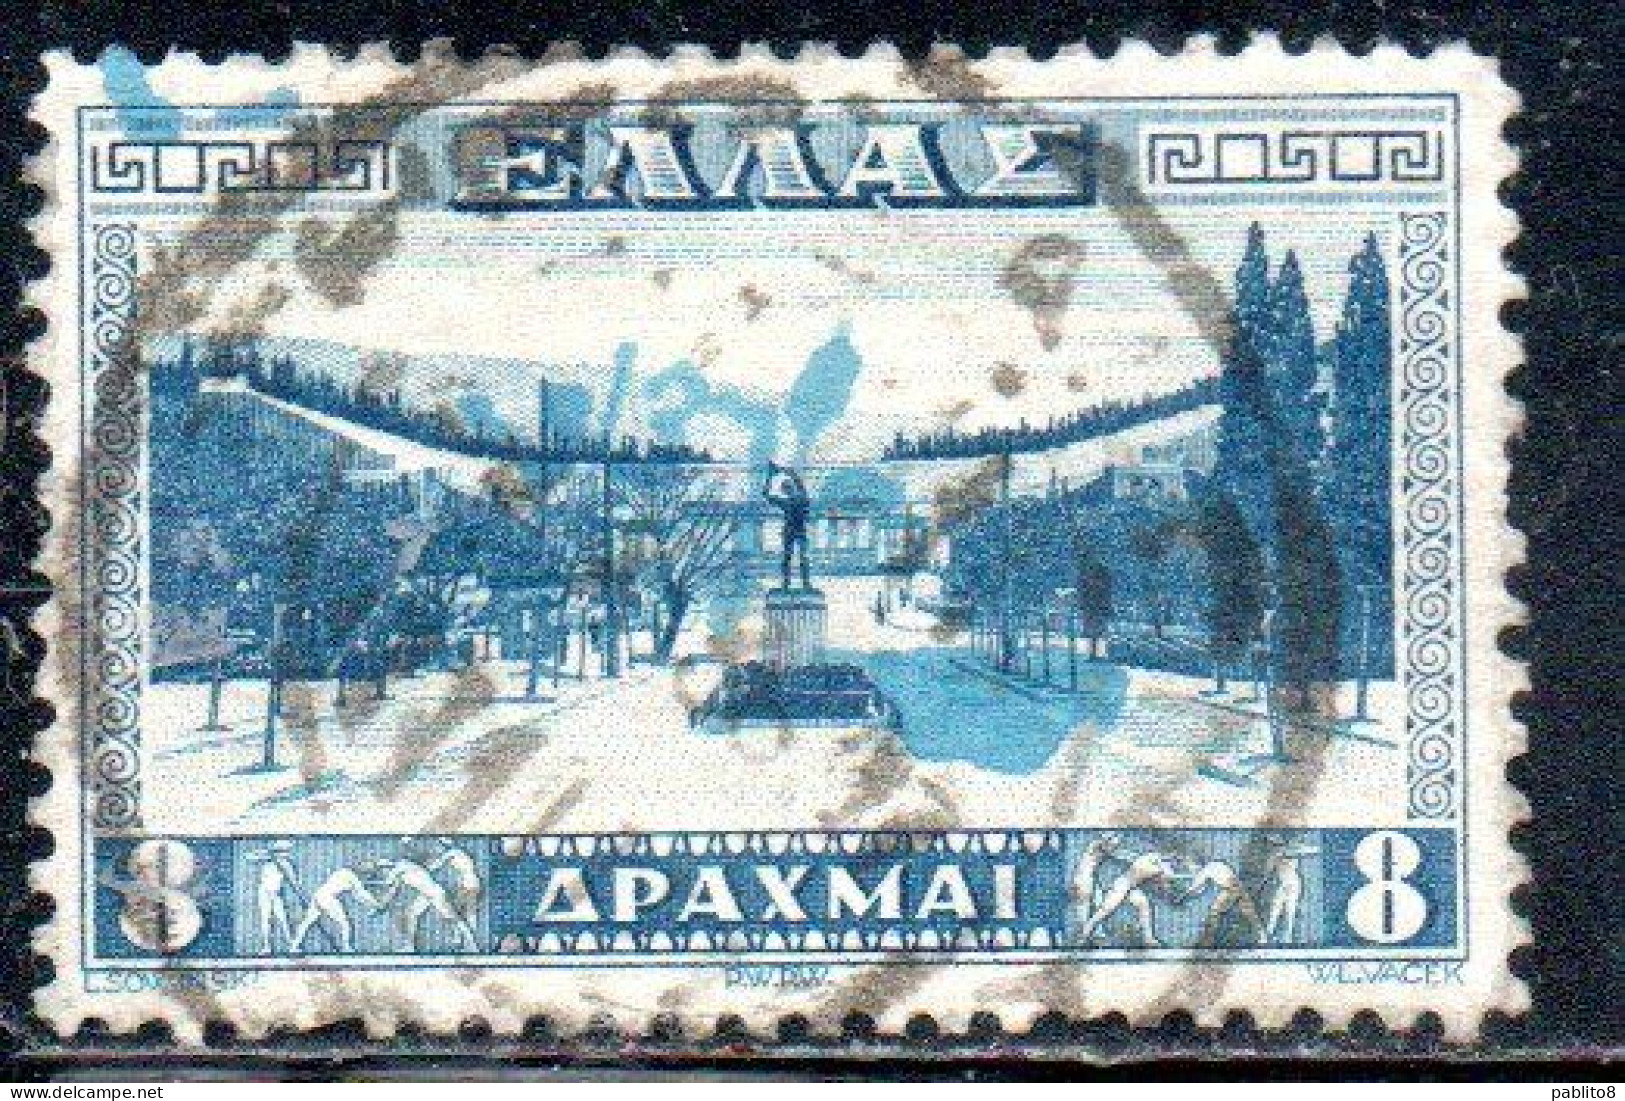 GREECE GRECIA HELLAS 1934 APPROACH TO ATHENS STADIUM 8d USED USATO OBLITERE' - Gebraucht